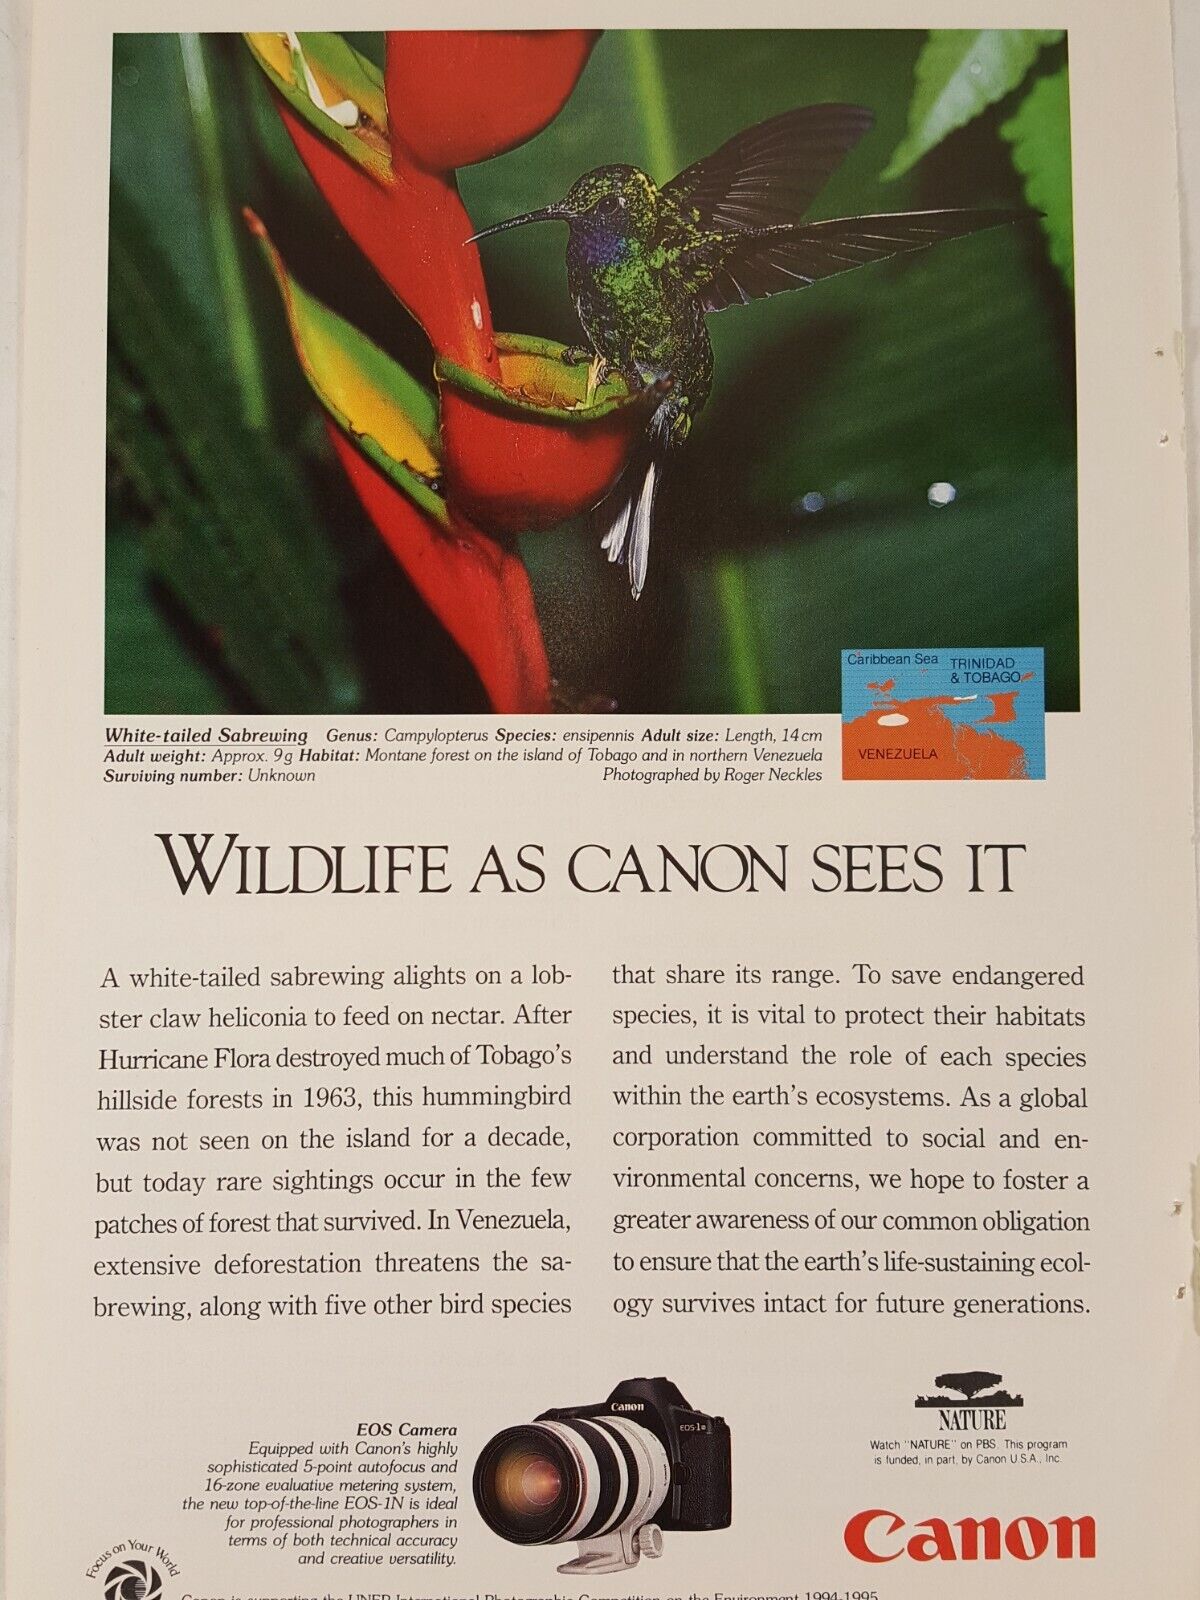 Print Ad Canon EOS Camera Wildlife 1994 NordicTrack from Advertising Nat Geo Mag